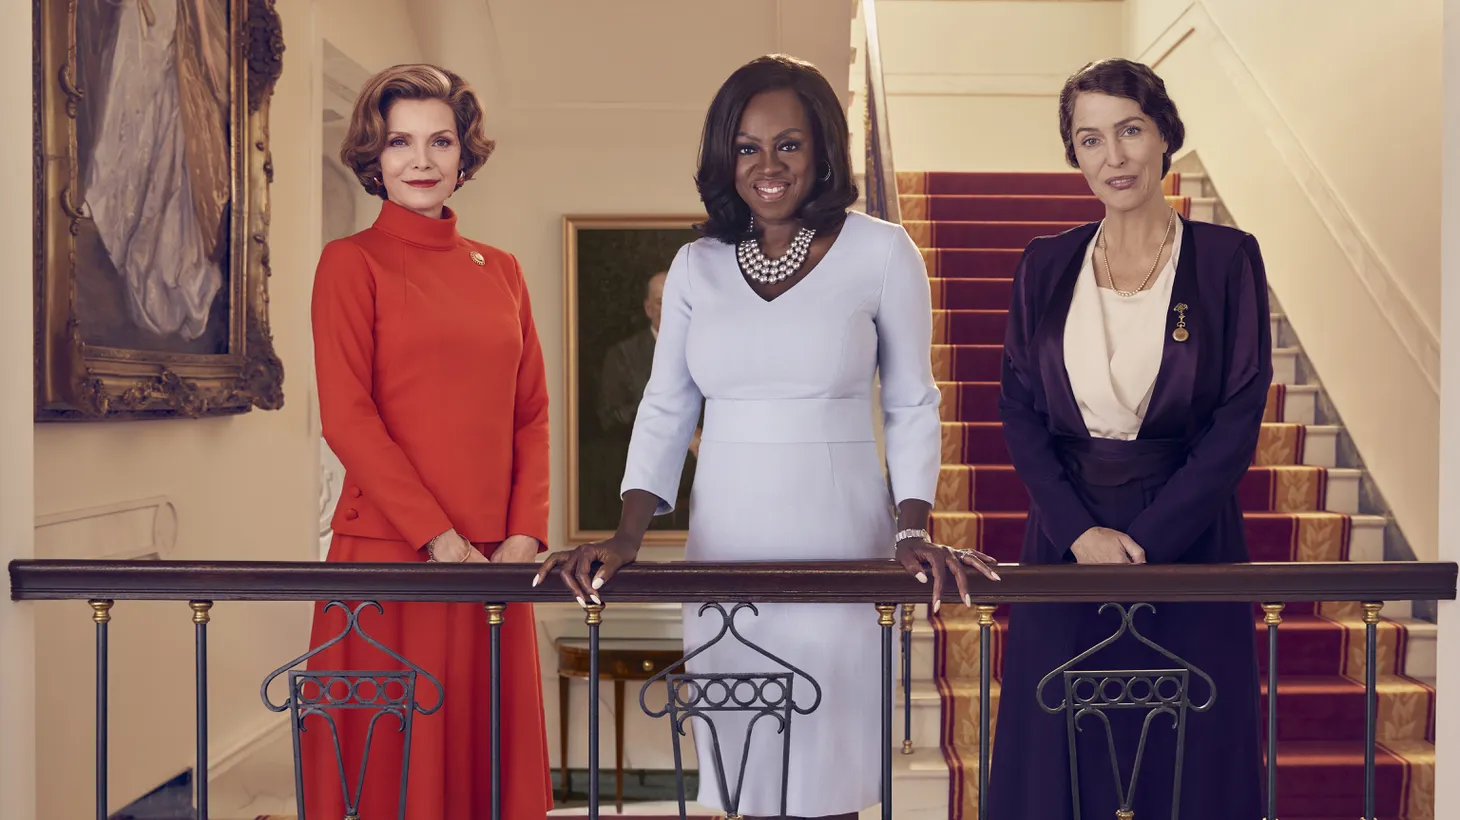 (L to R) Michelle Pfeiffer plays Betty Ford, Viola Davis plays Michelle Obama, and Gillian Anderson plays Eleanor Roosevelt in “The First Lady.”